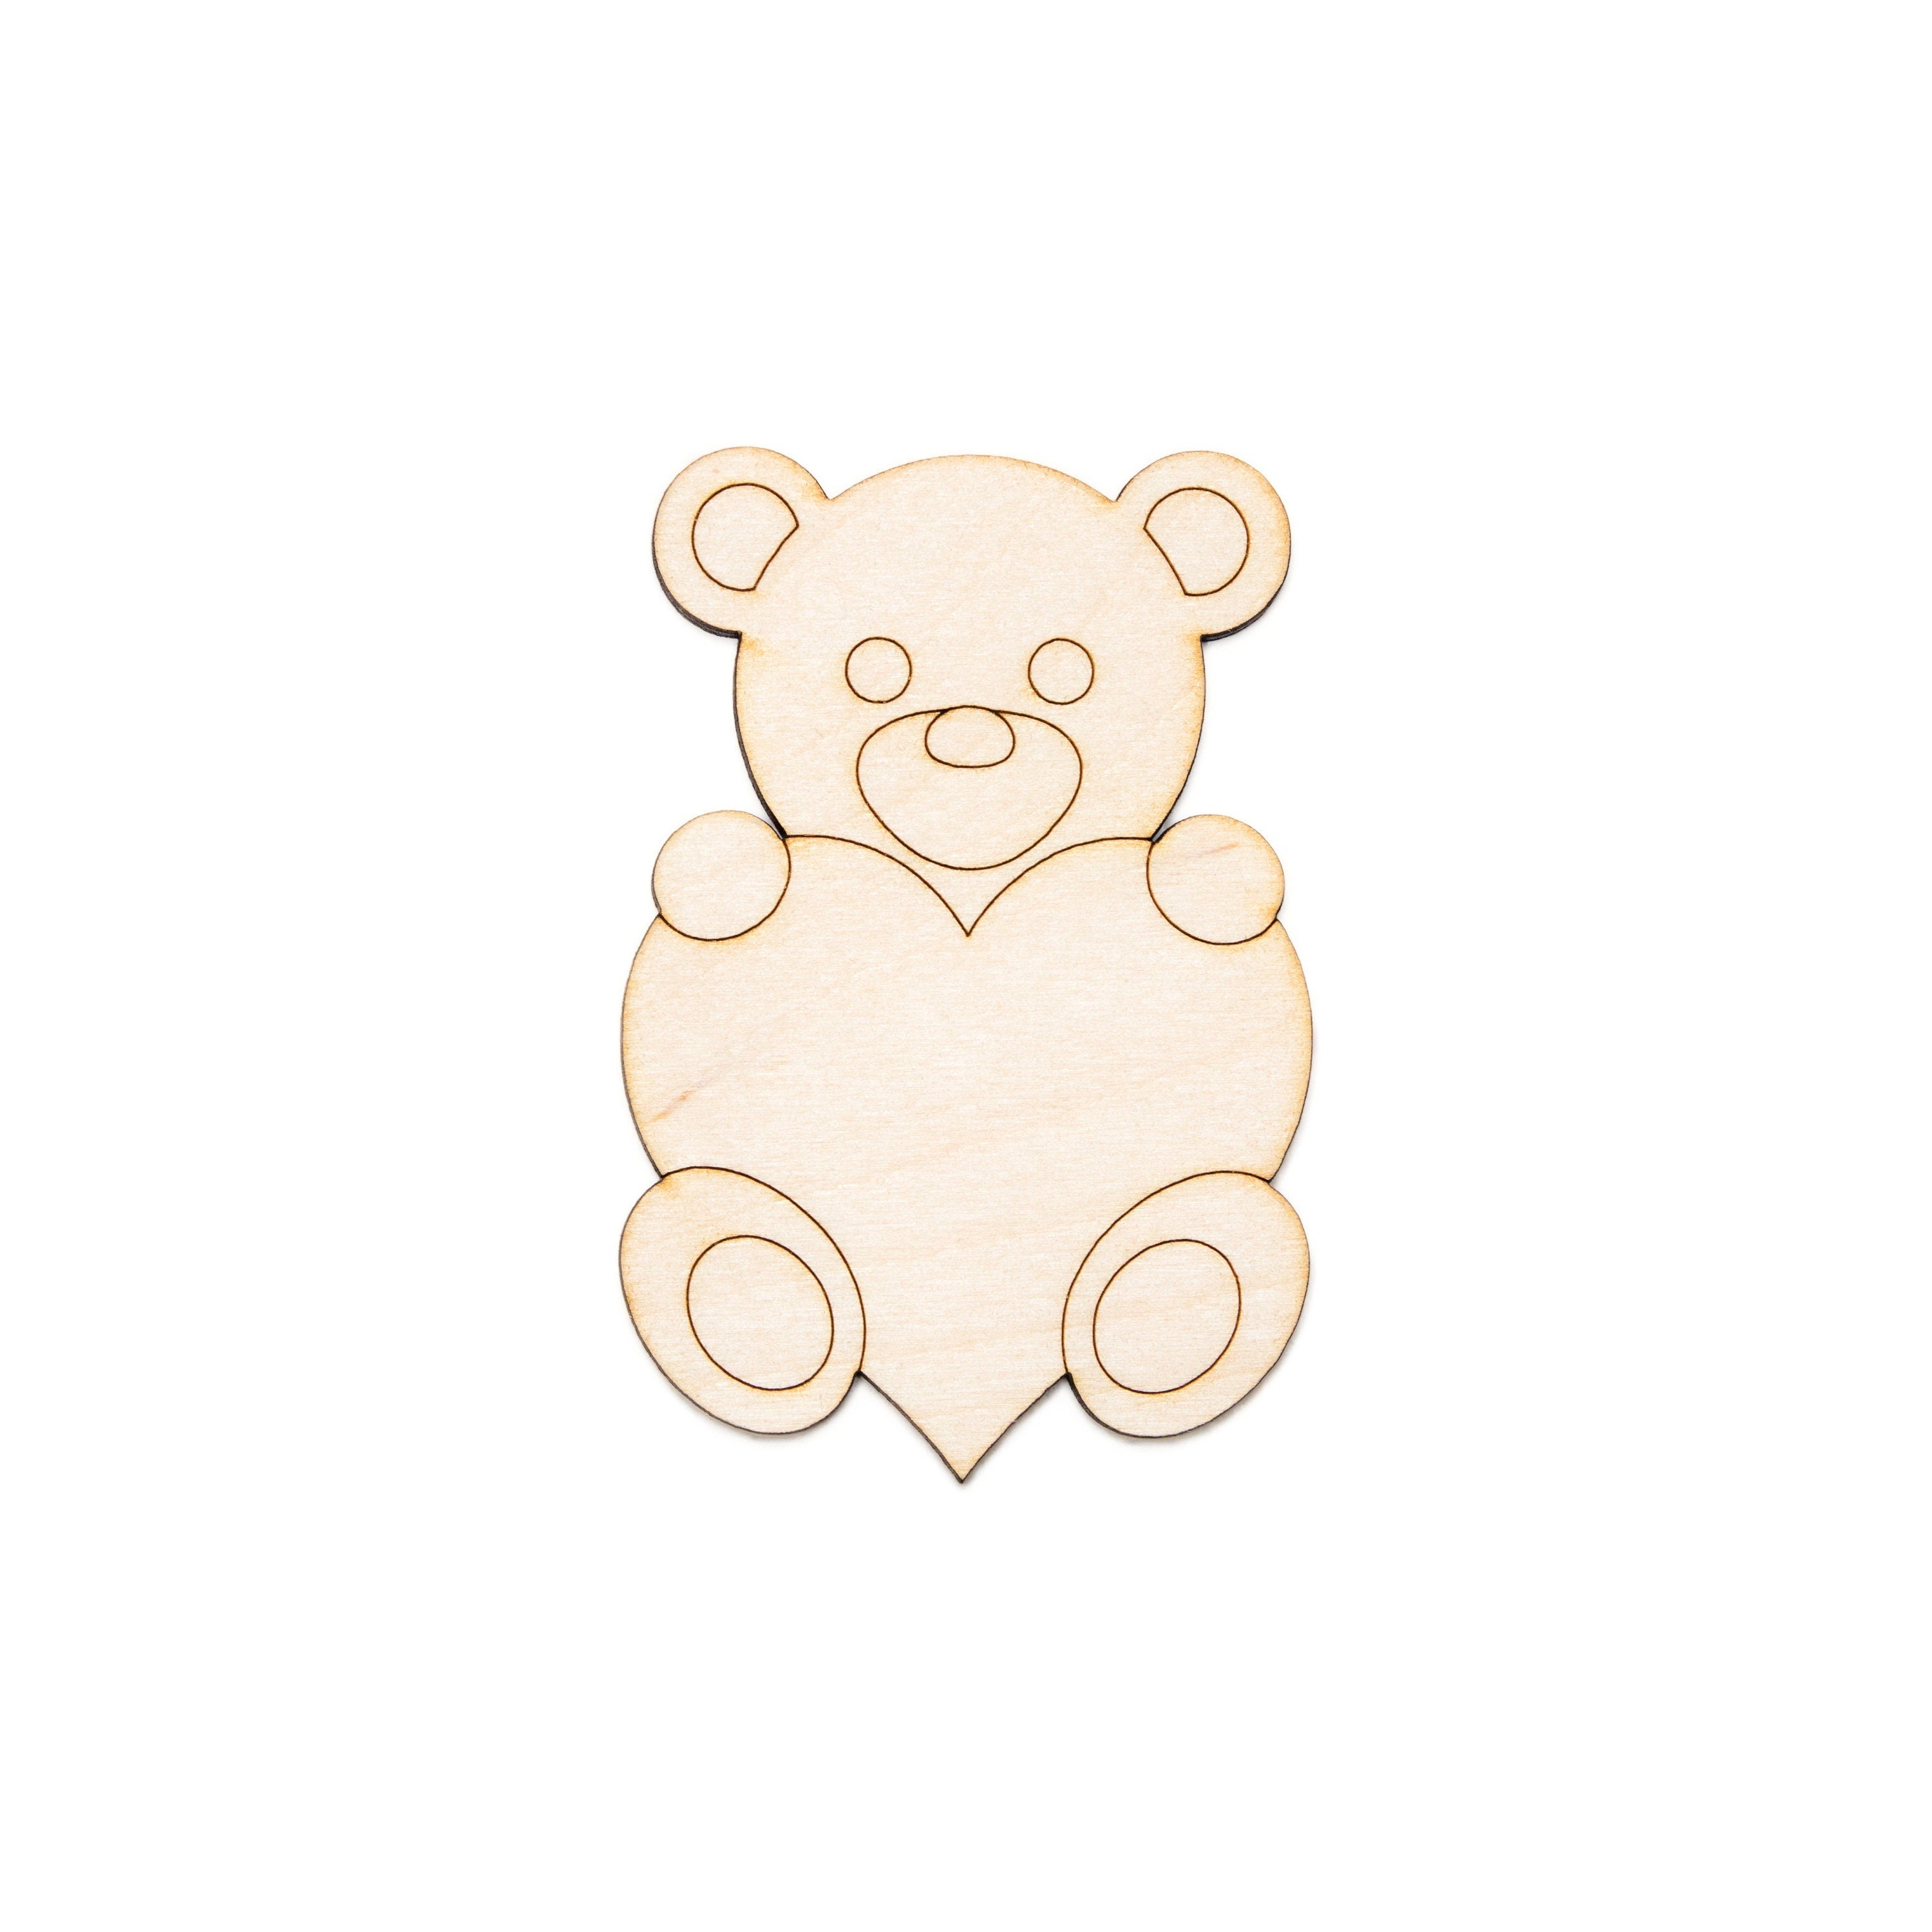 Learn how to draw a teddy bear... - Art Projects for Kids | Facebook